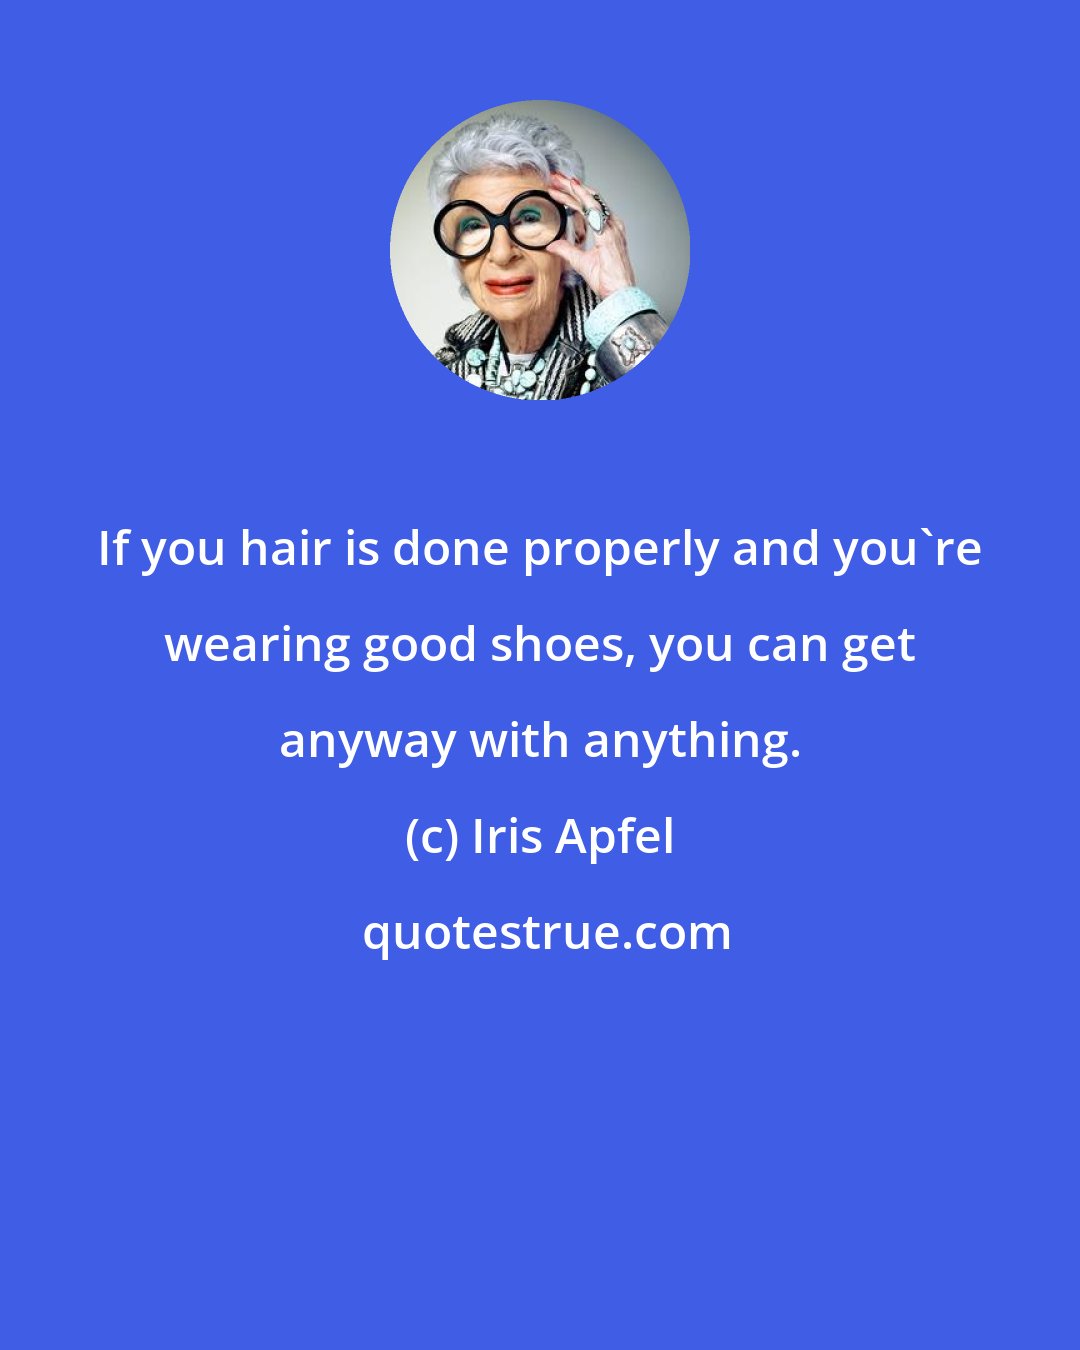 Iris Apfel: If you hair is done properly and you're wearing good shoes, you can get anyway with anything.